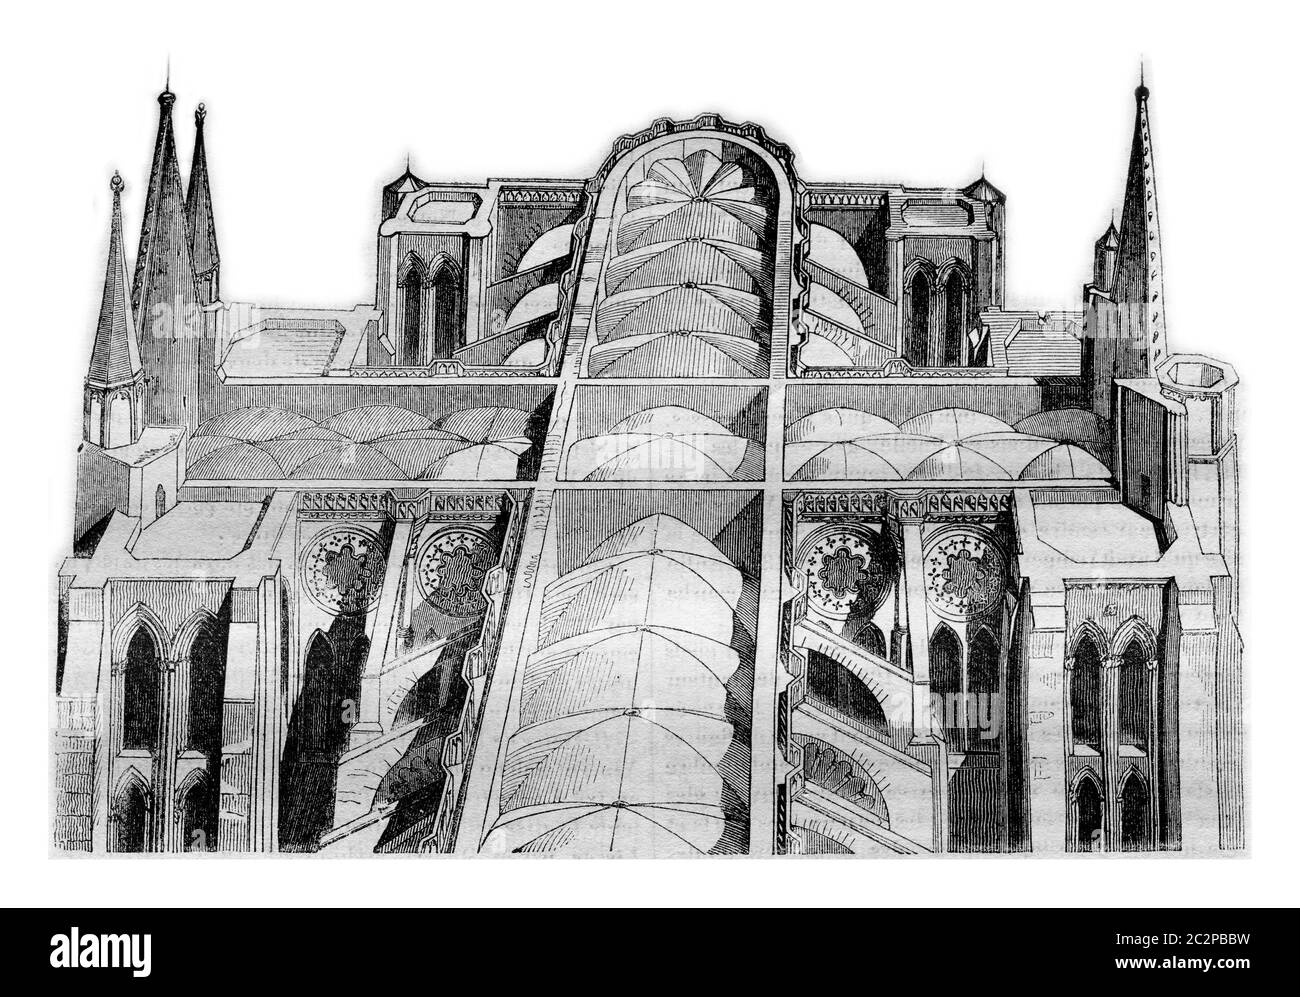 Anterior and posterior part of the cathedral of Chartres since the fire on 4 and 5 June View taken of one of the drivers, vintage engraved illustratio Stock Photo